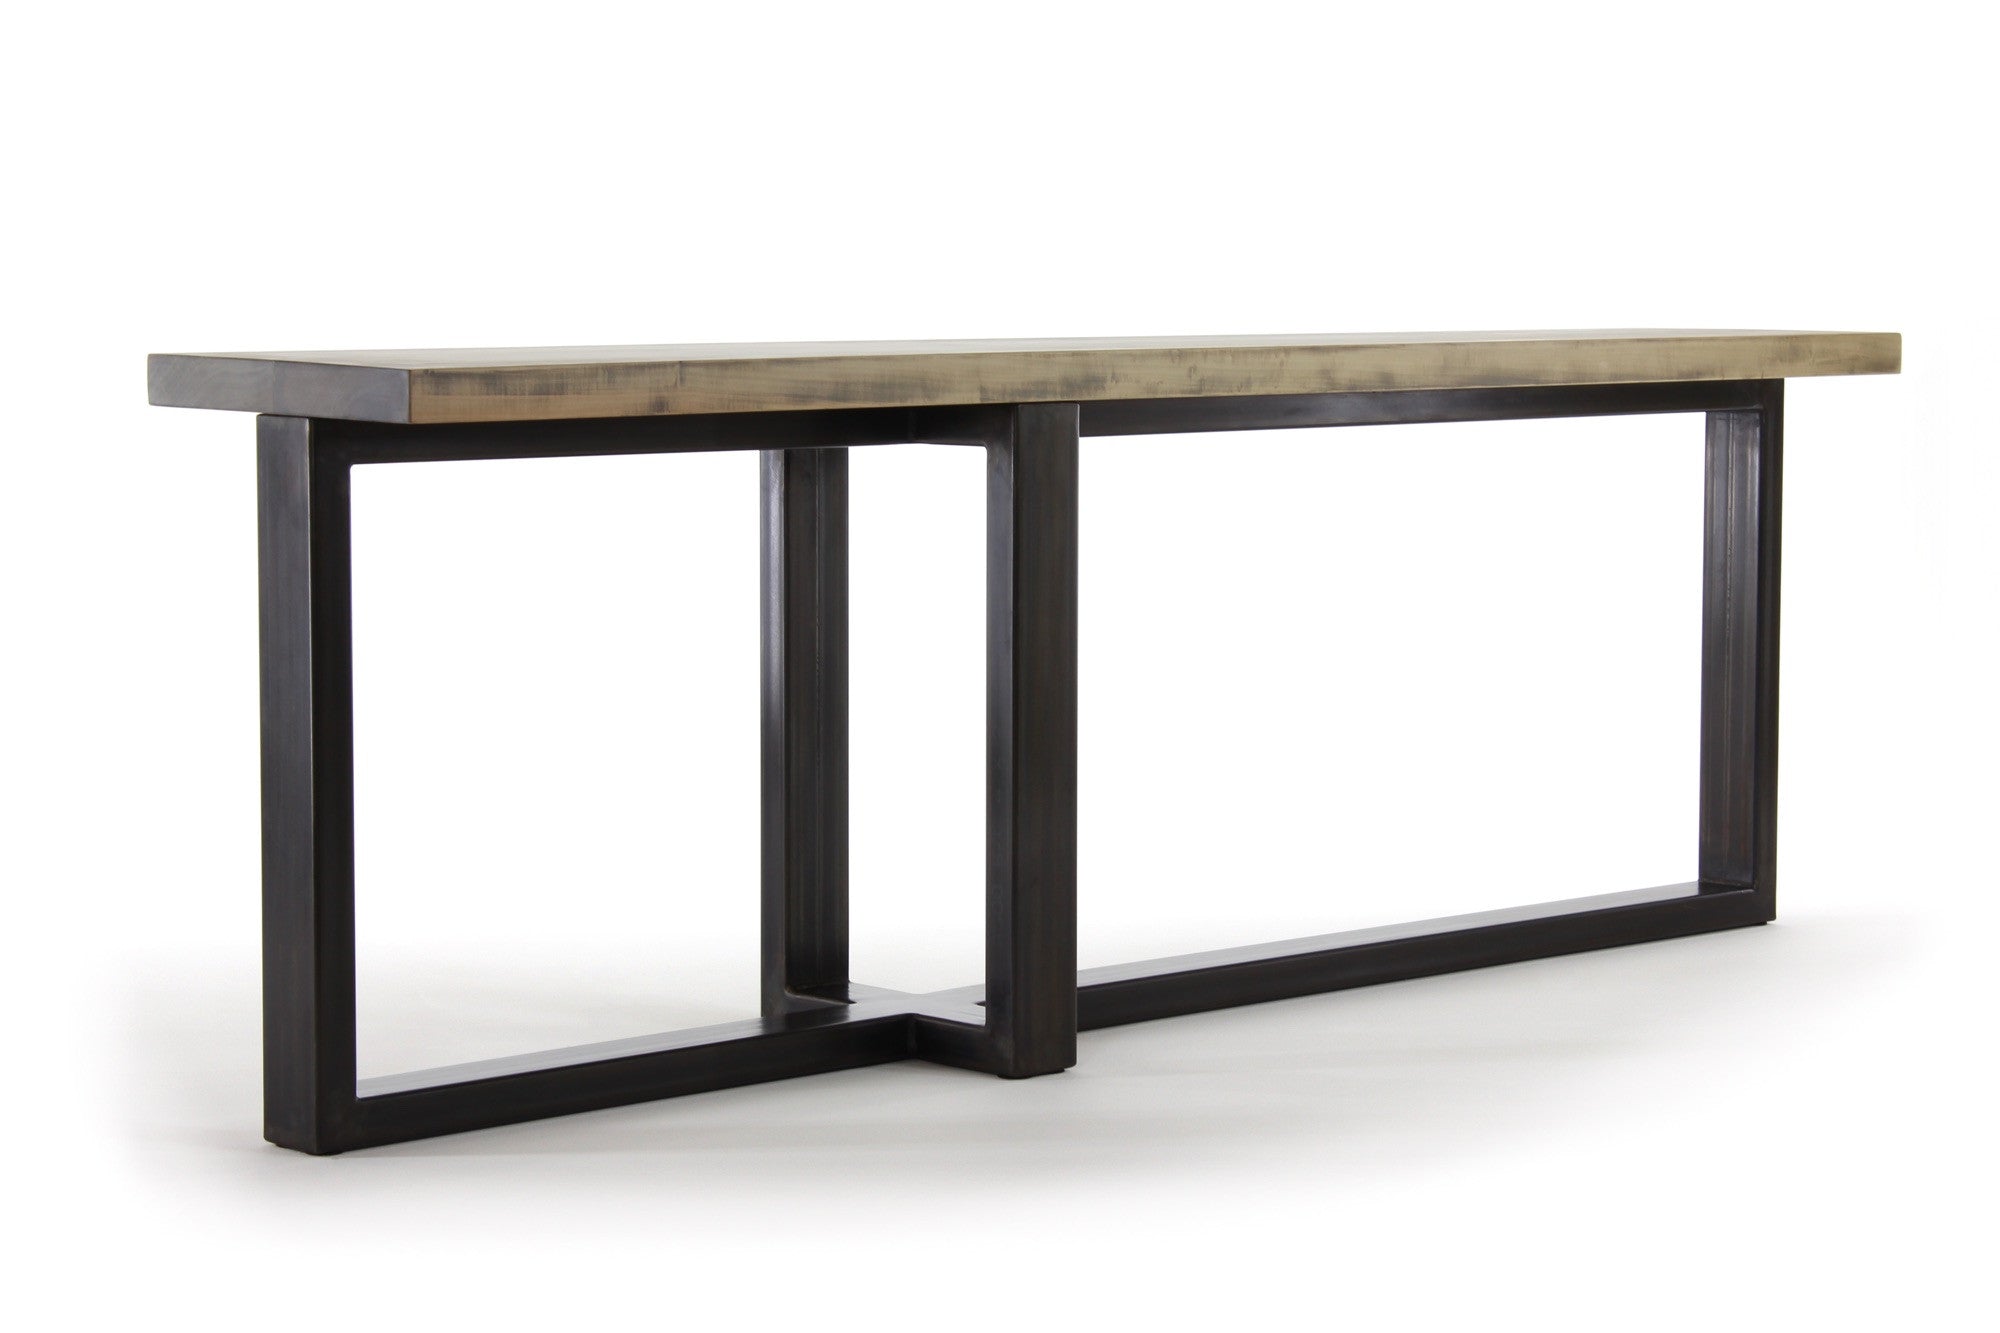 8' concord console table | worn maple wood finish with waxed steel